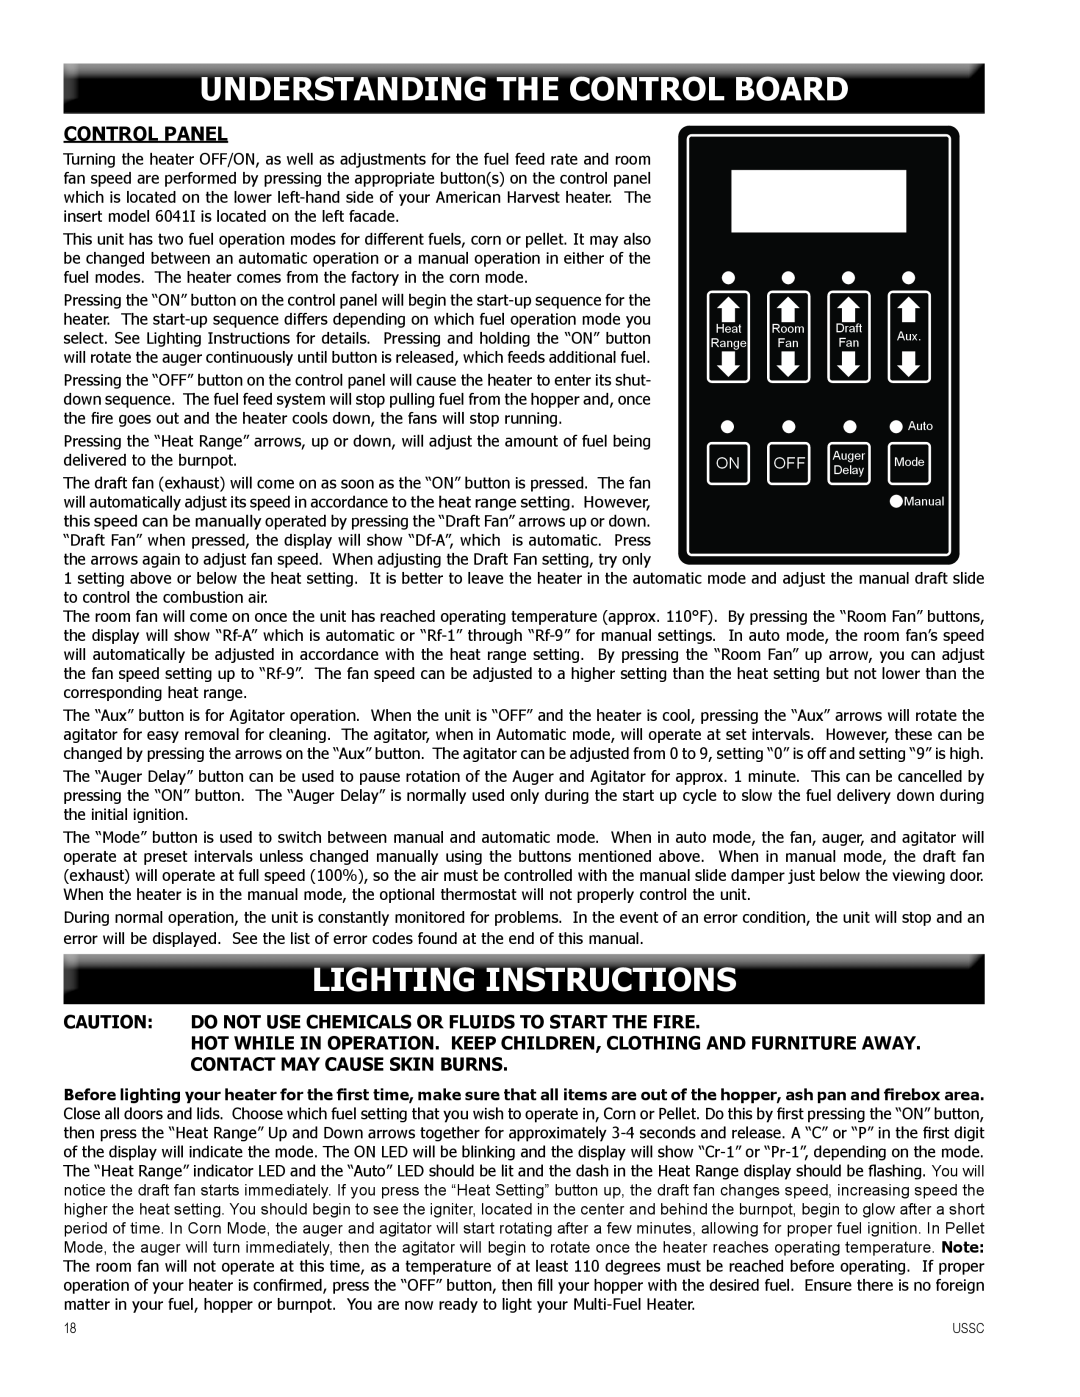 United States Stove 6041TP, 6041I, 6041HF warranty Understanding The Control Board, Lighting Instructions, Control Panel 